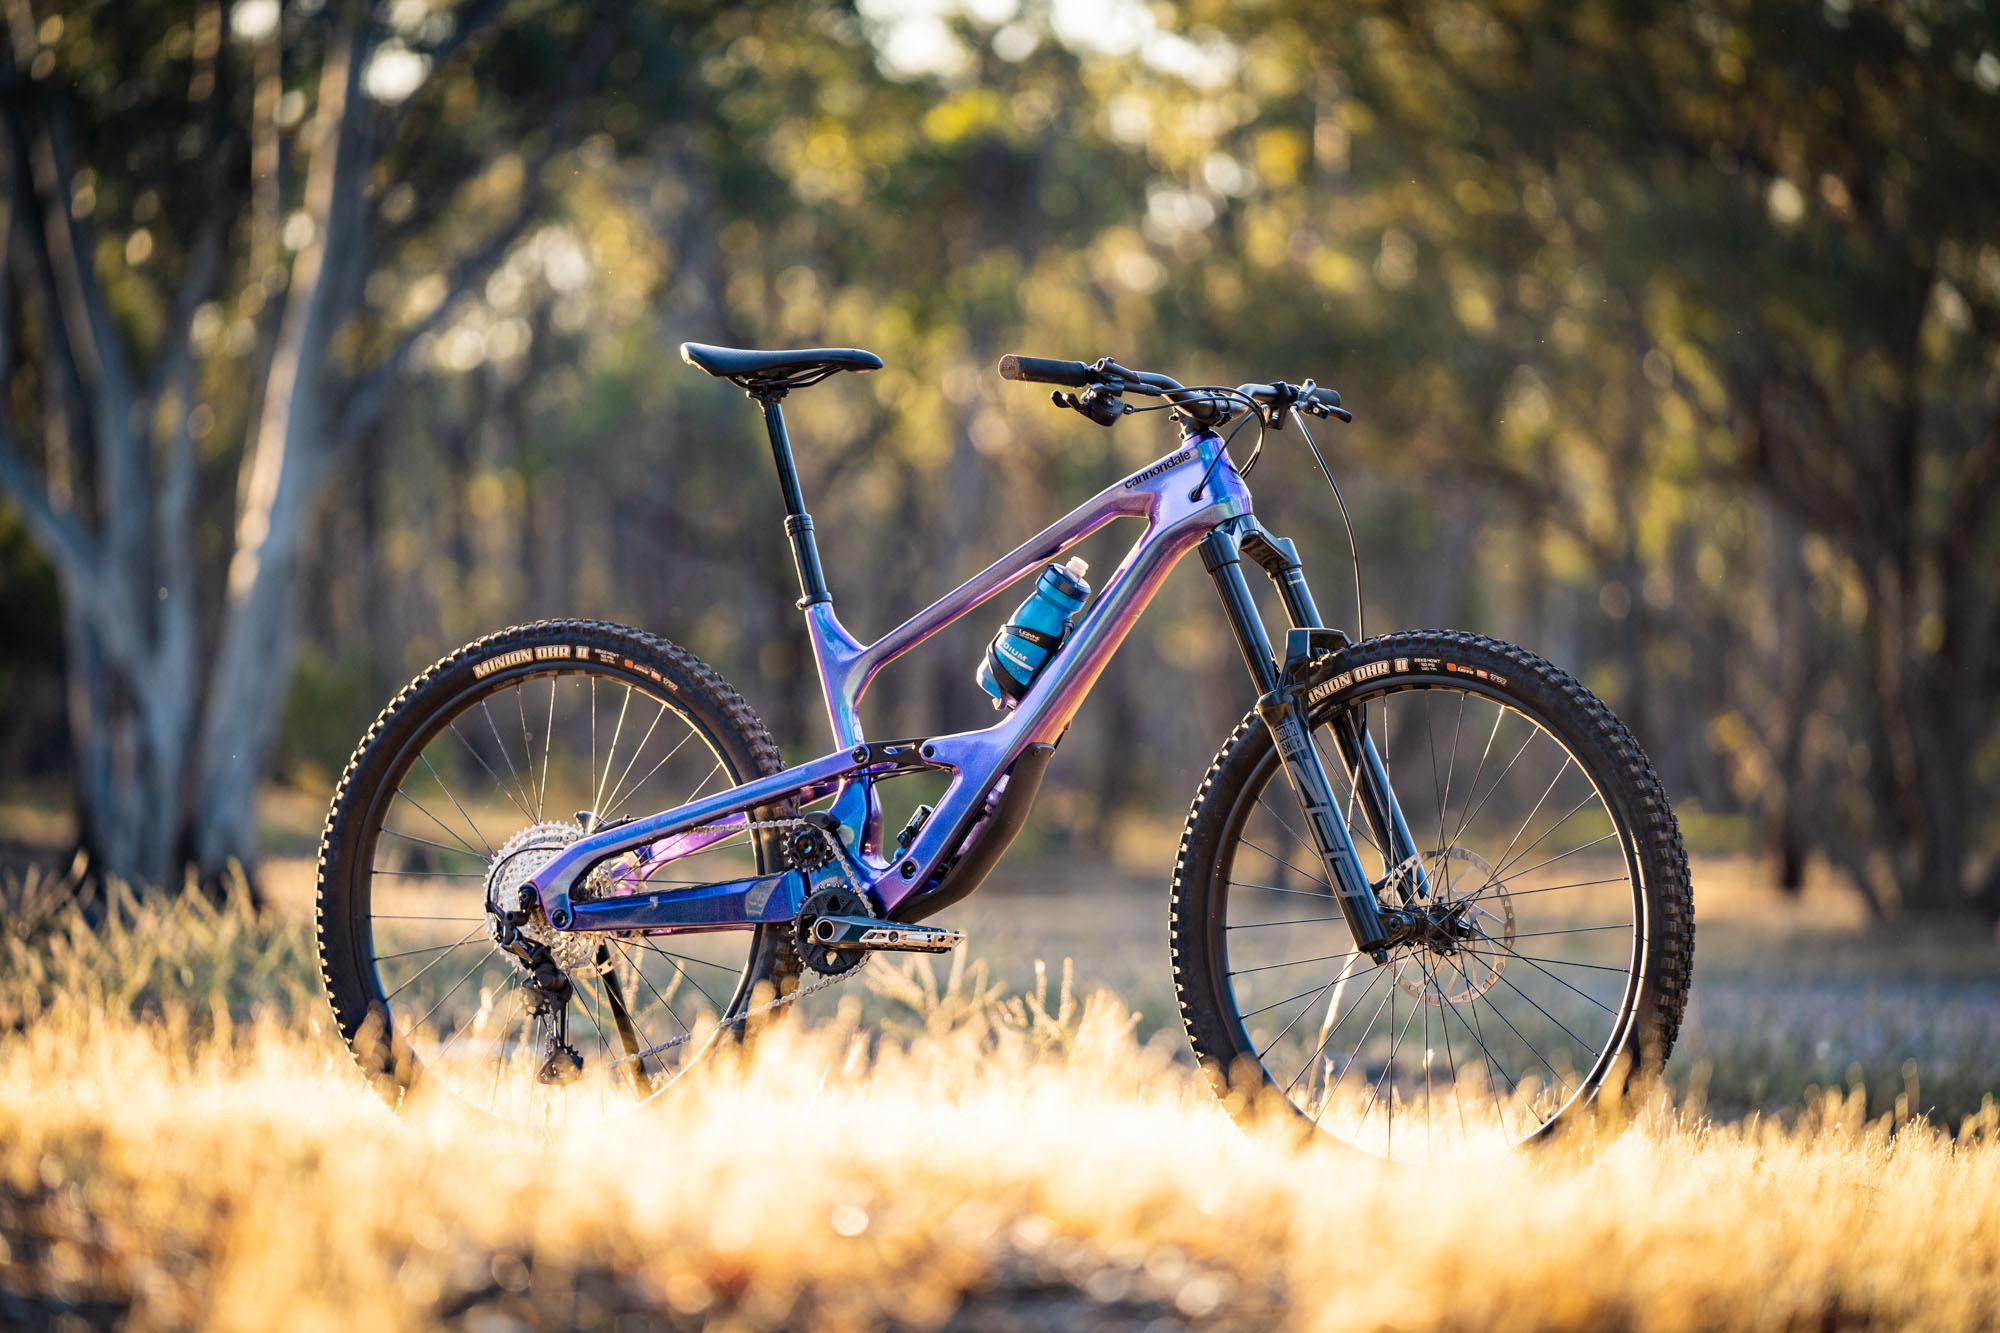 The Cannondale Jekyll is among one of the best enduro mountain bikes we've tested